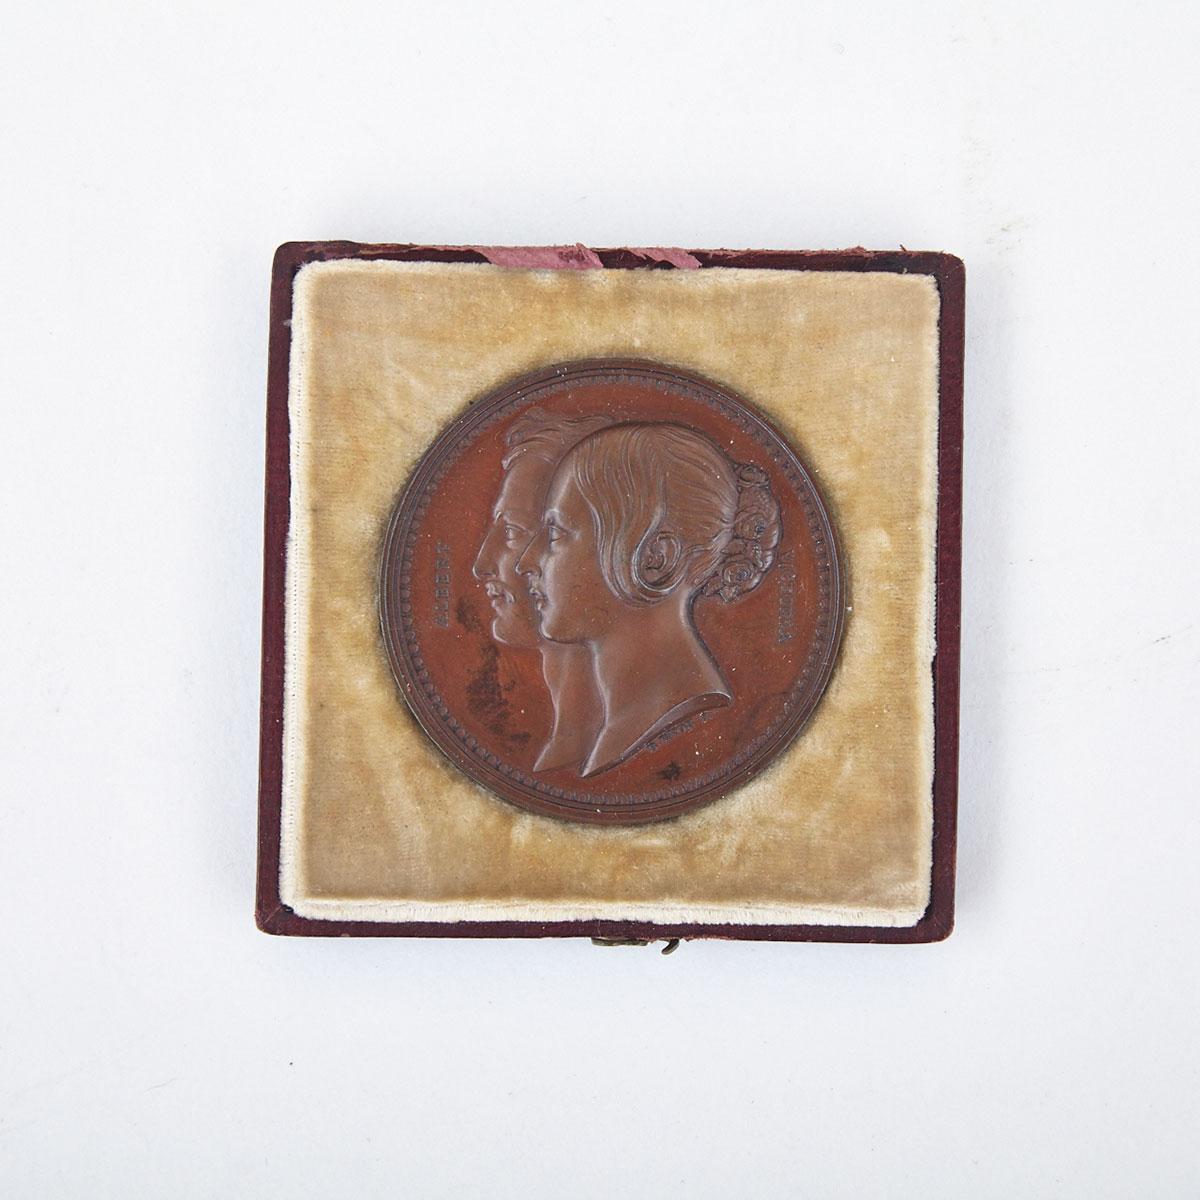 Bronze Medal Commemorating the Marriage of Victoria and Albert, 1840